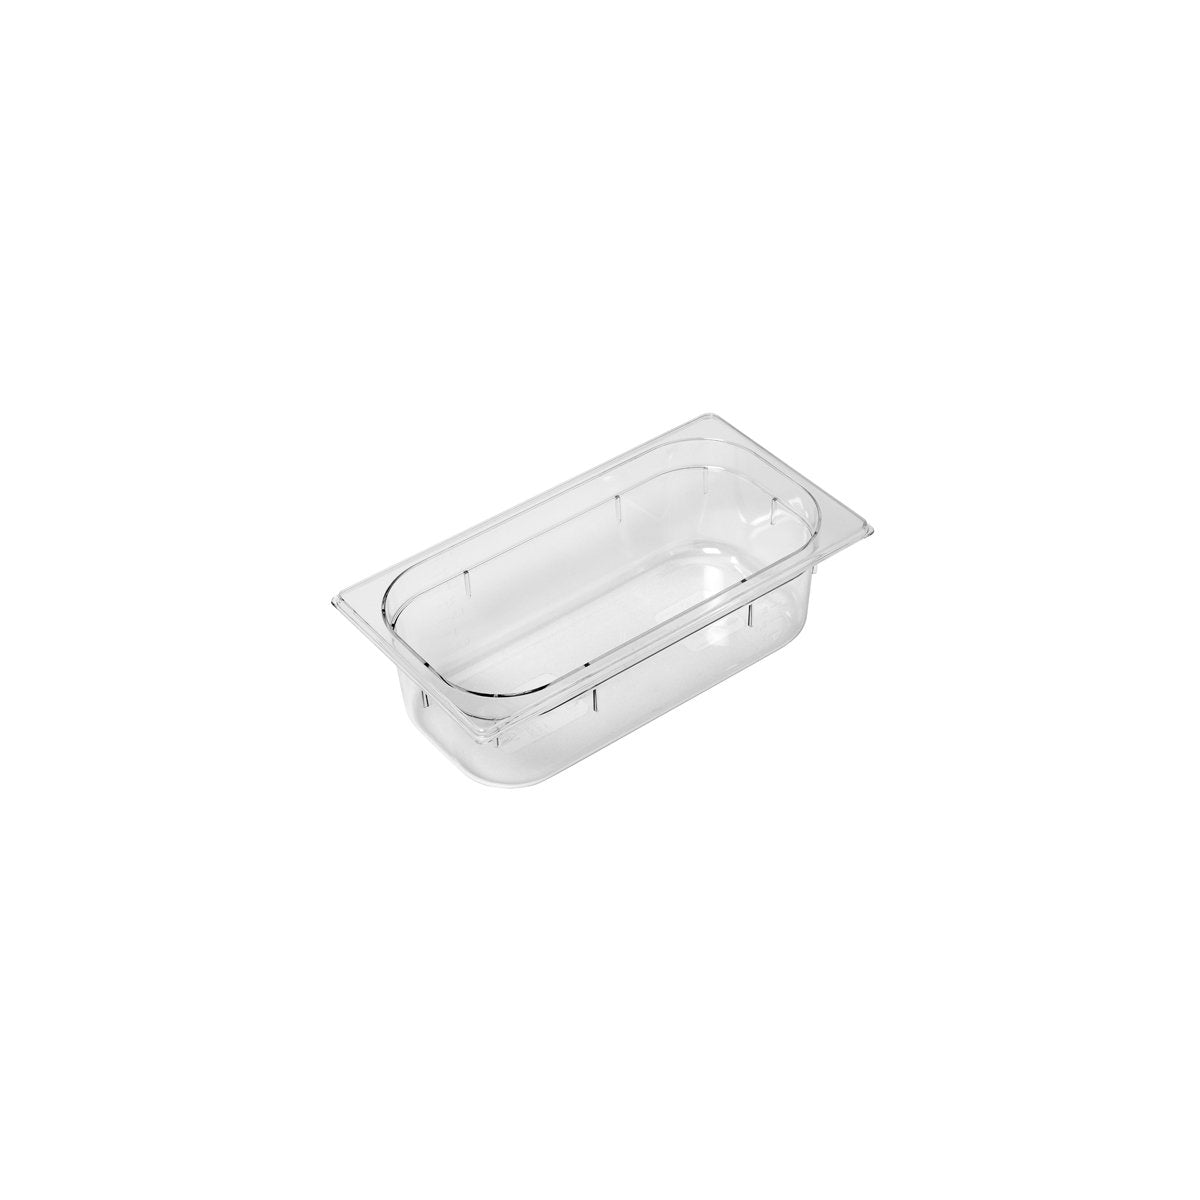 PC-13100CL Inox Macel Gastronorm Pan Polycarbonate Clear 1/3 Size 100mm Tomkin Australia Hospitality Supplies